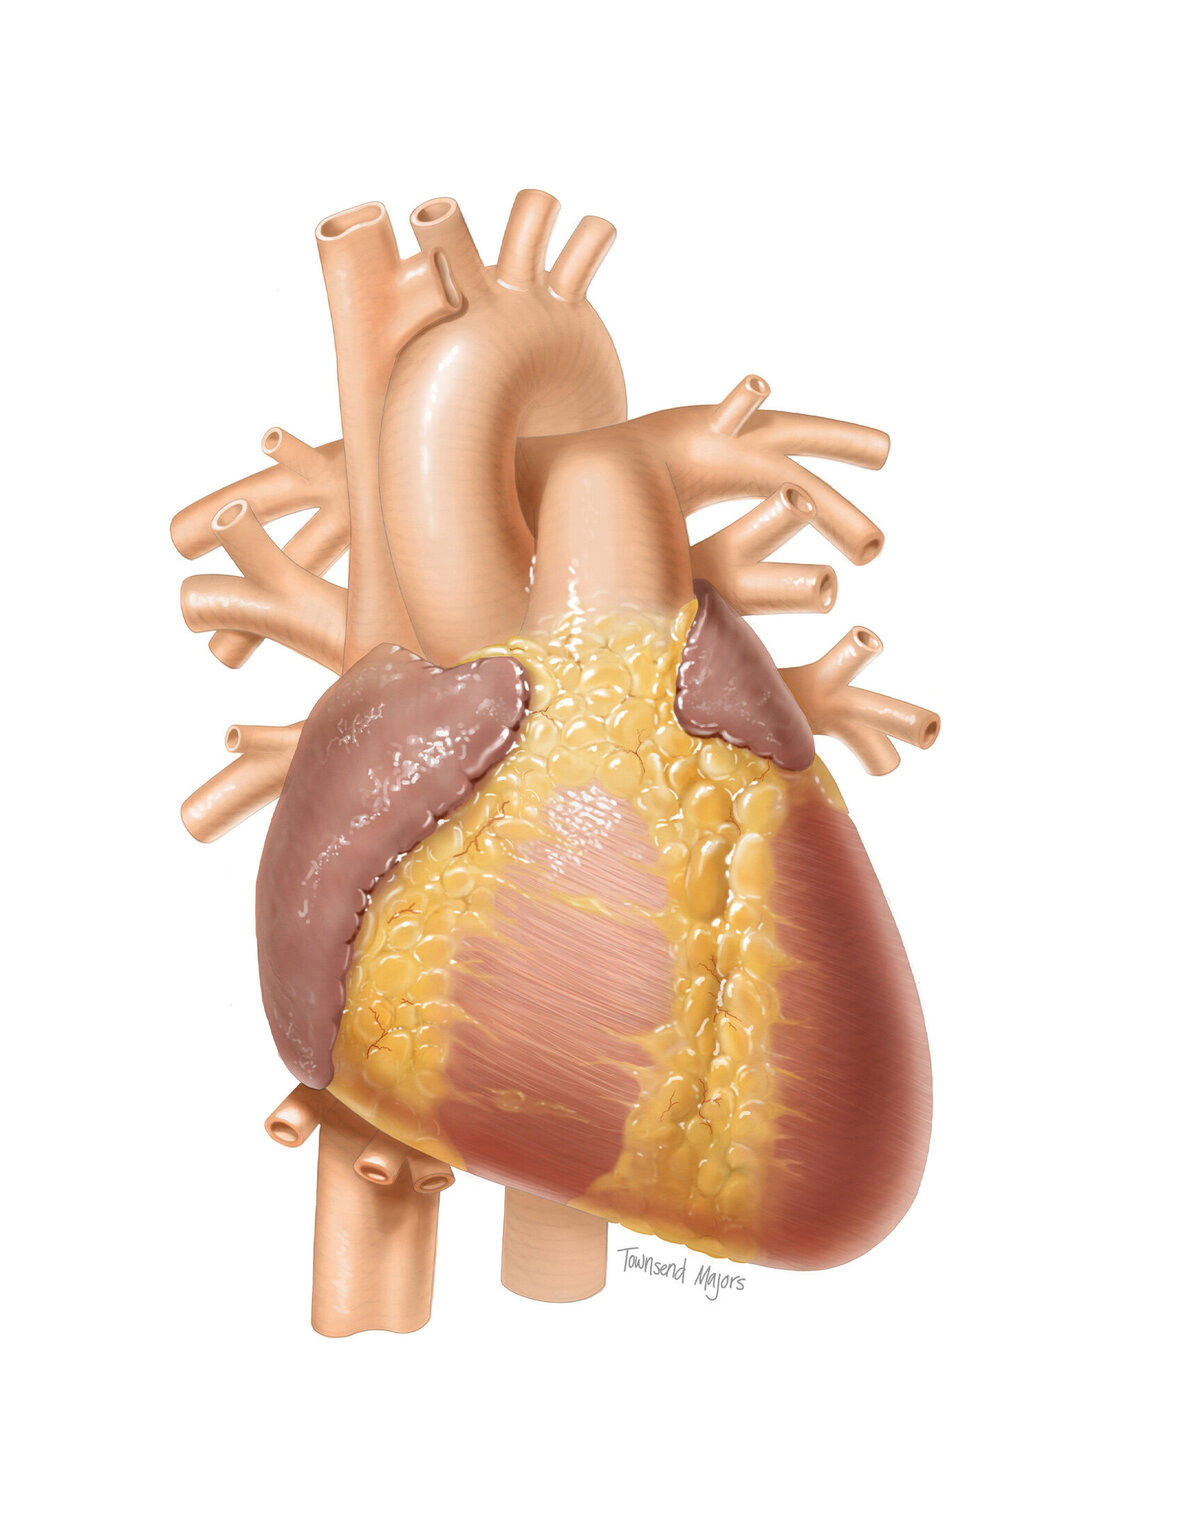 Townsend Majors' illustration of an anatomical heart